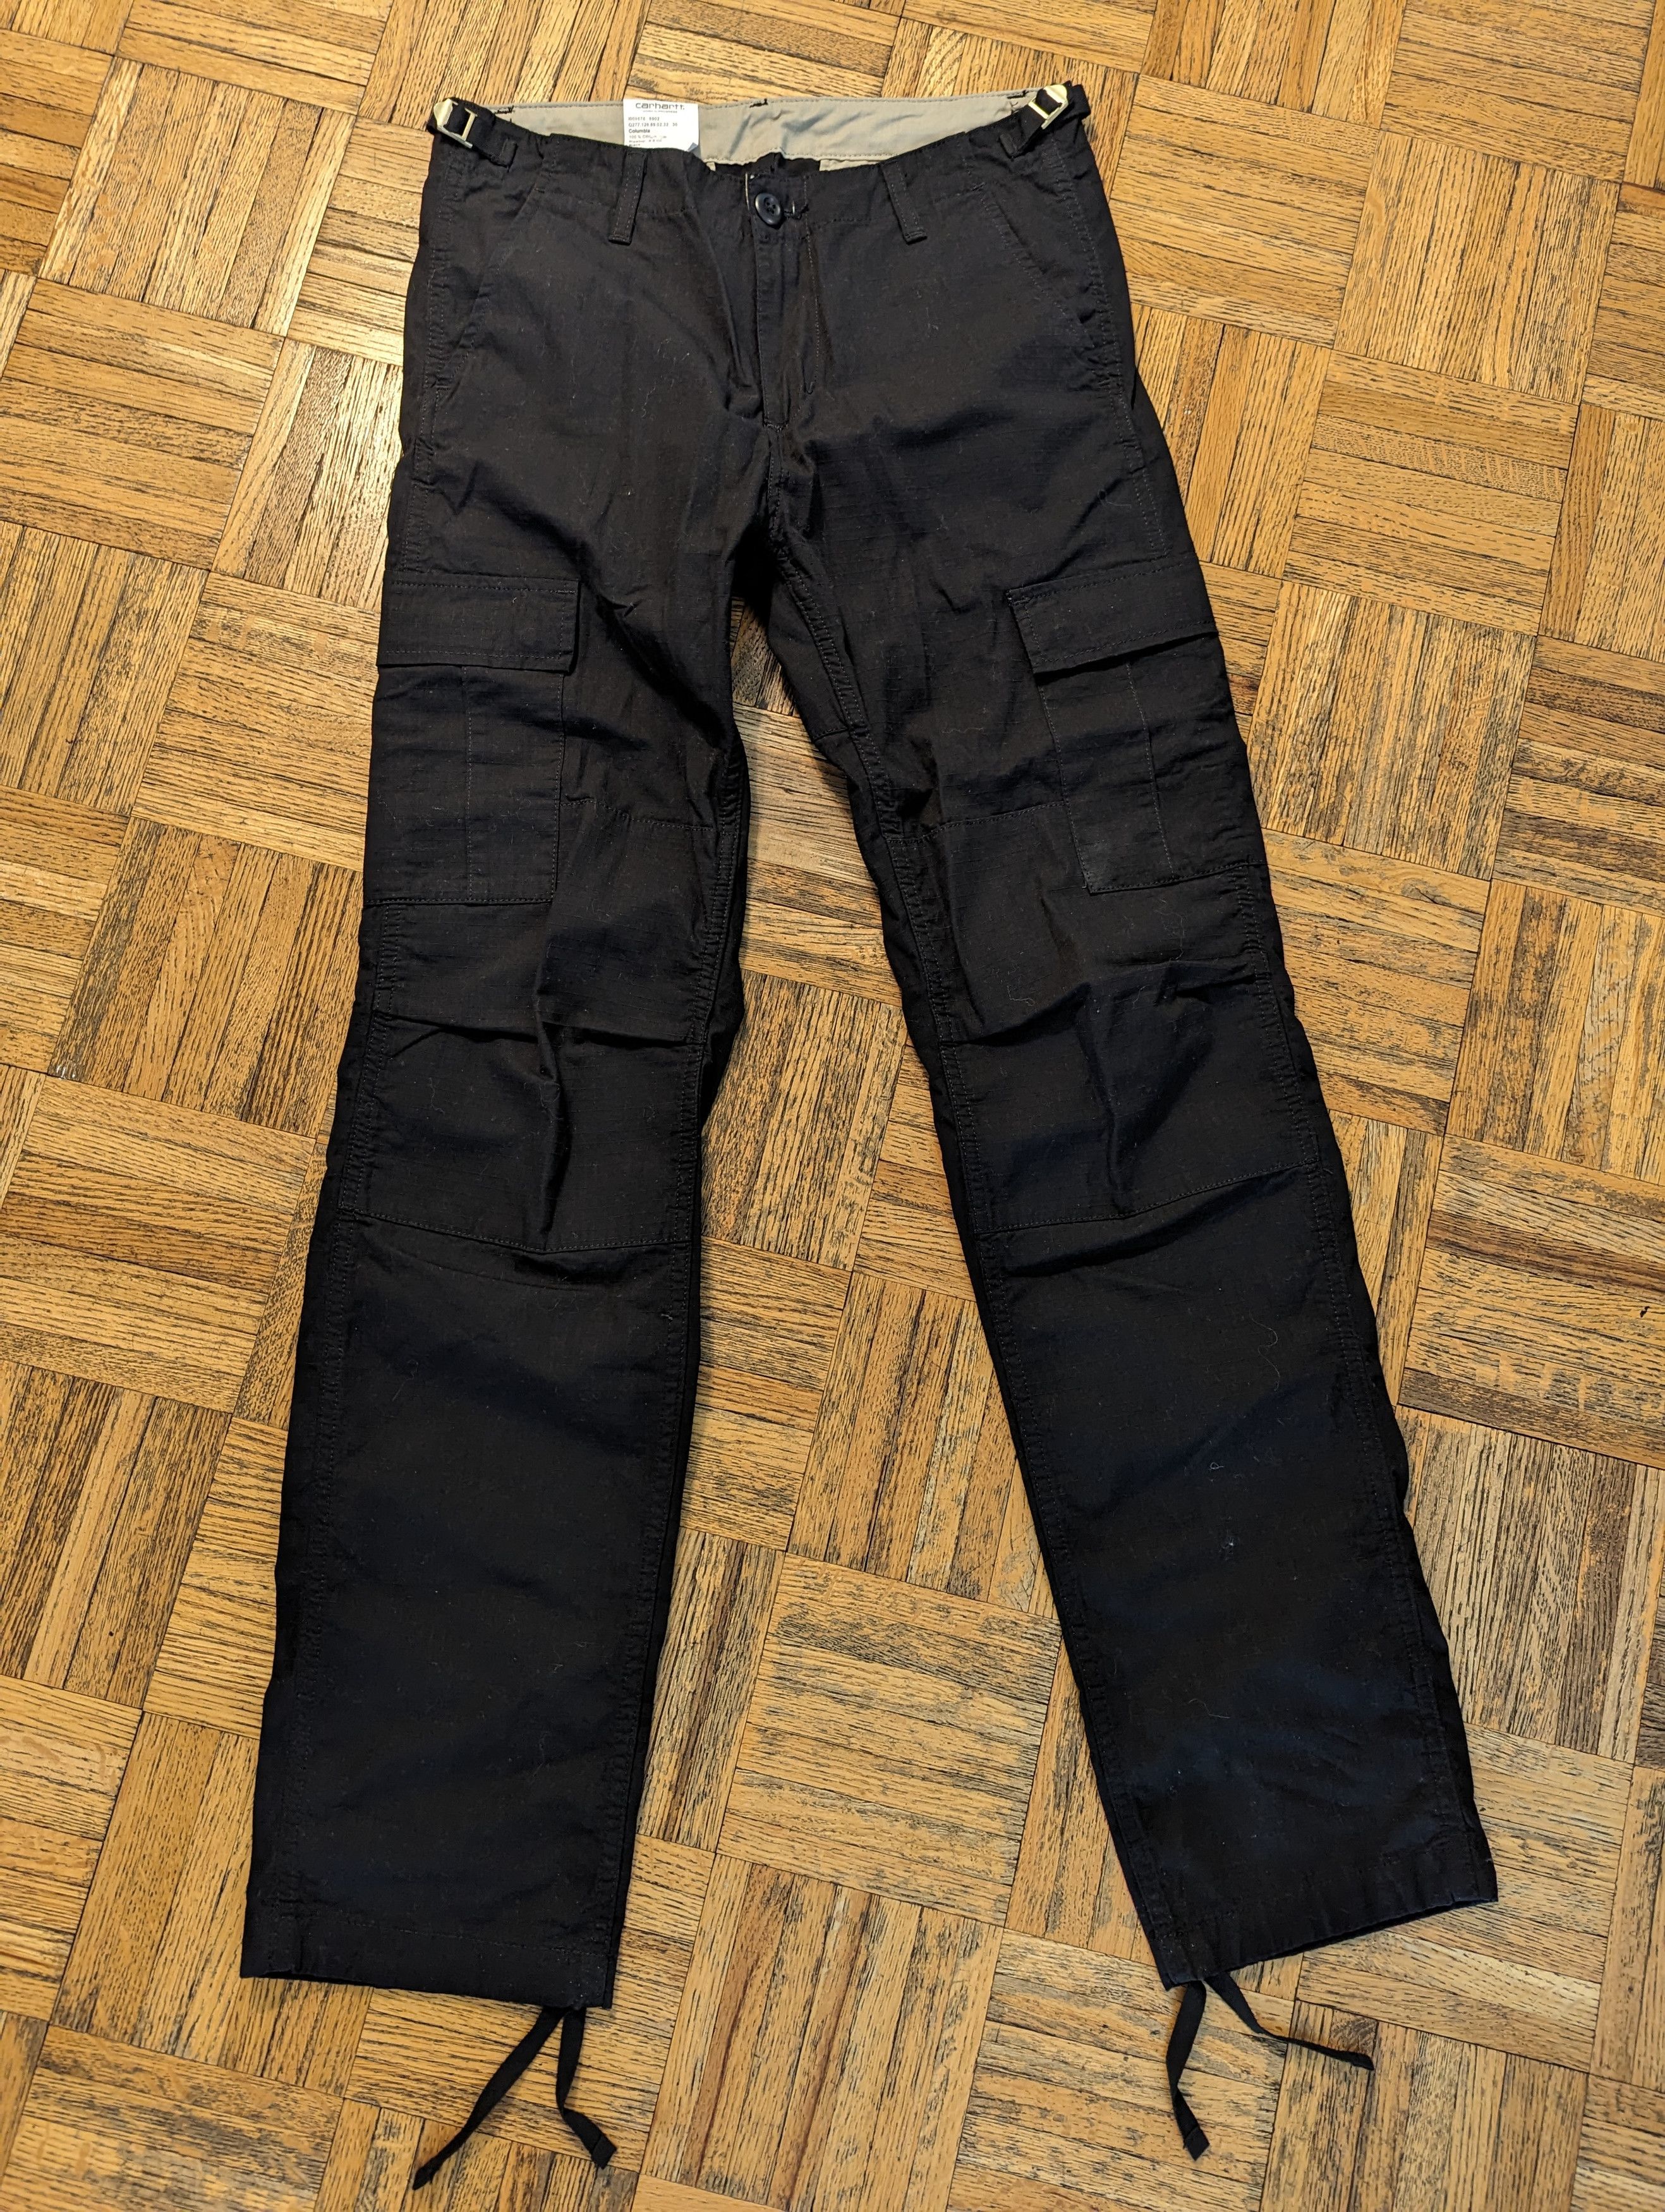 Carhartt Wip Cargo pants, new with tags | Grailed